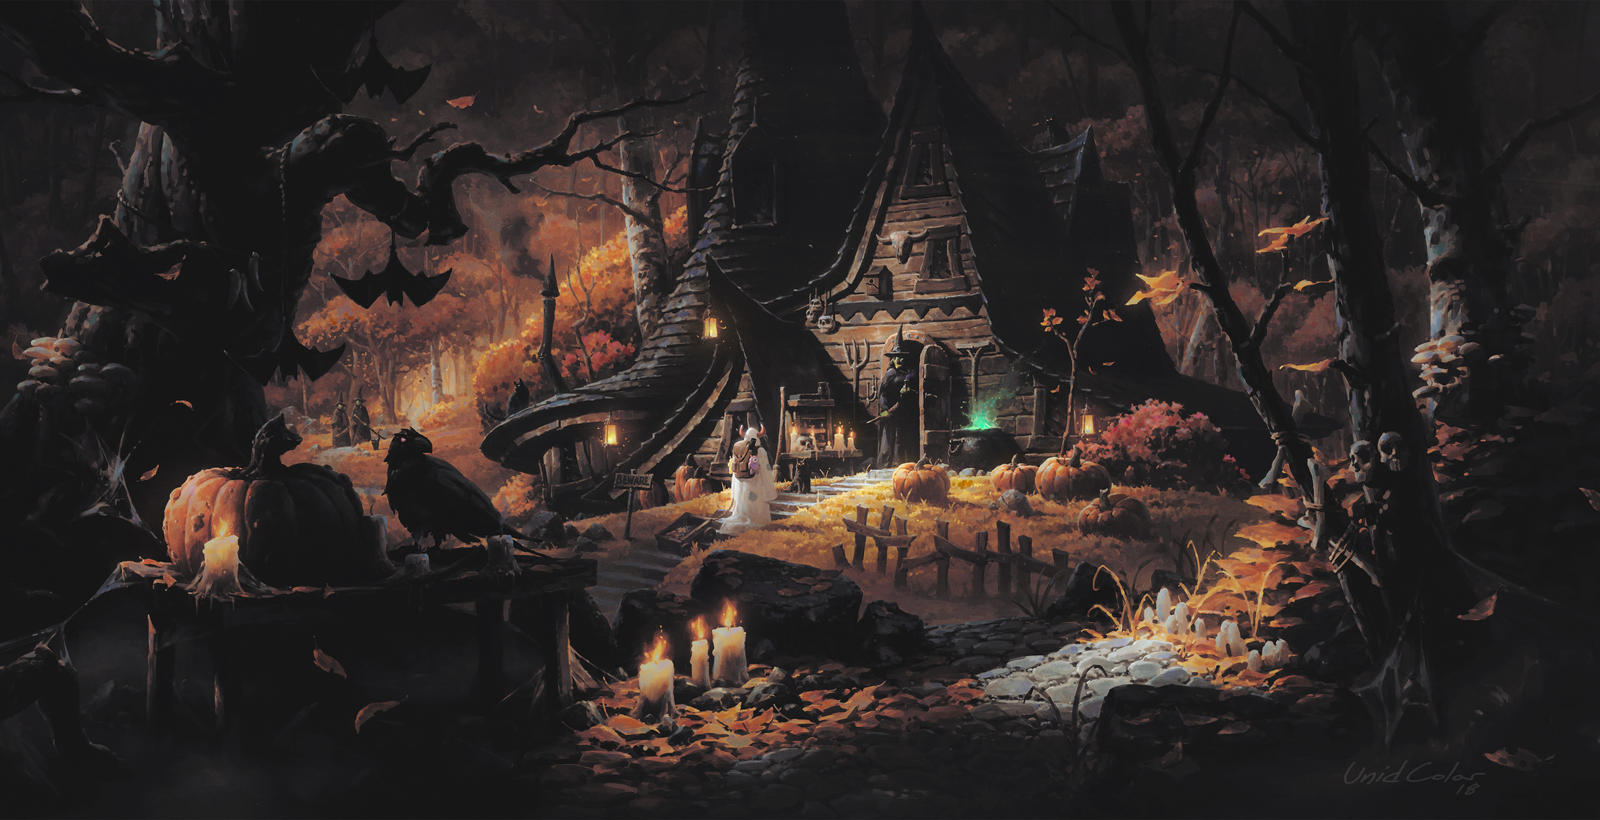 halloween_2018_by_unidcolor_dcqhd5t-fullview.jpg